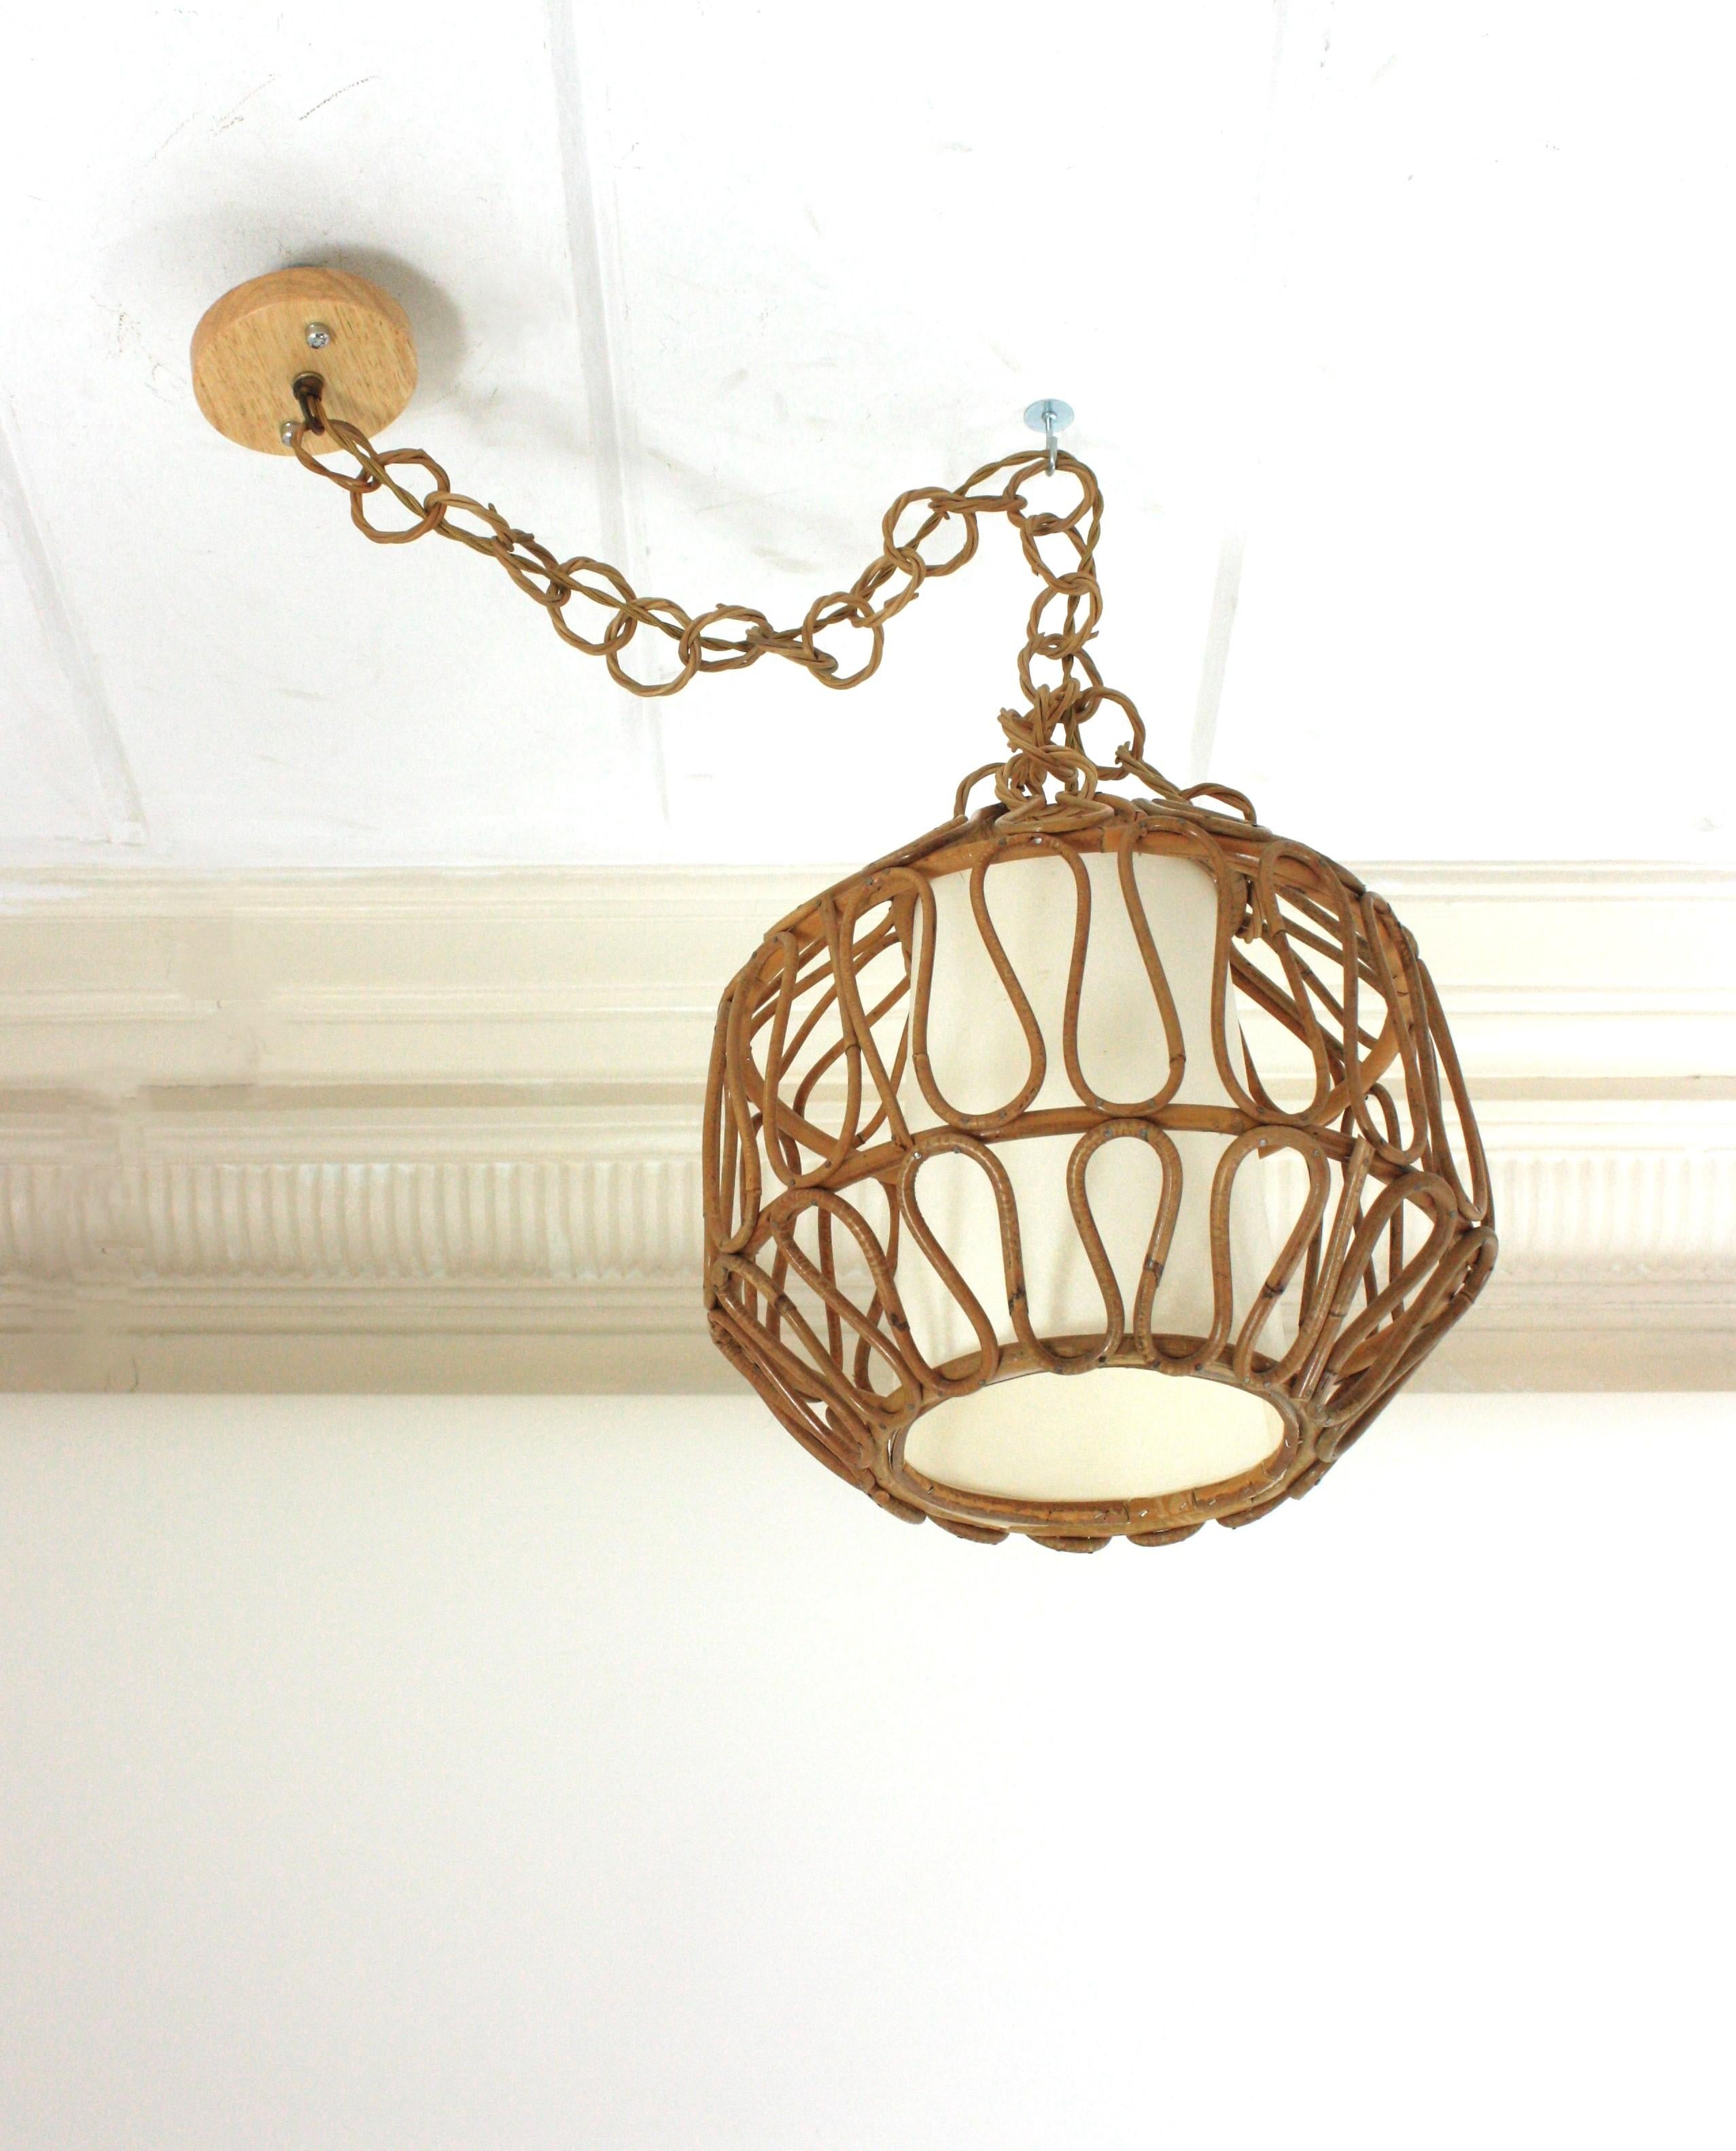 Mid-Century Modern Rattan Globe Pendant Light or Lantern with Loop Details, Spain, 1960s For Sale